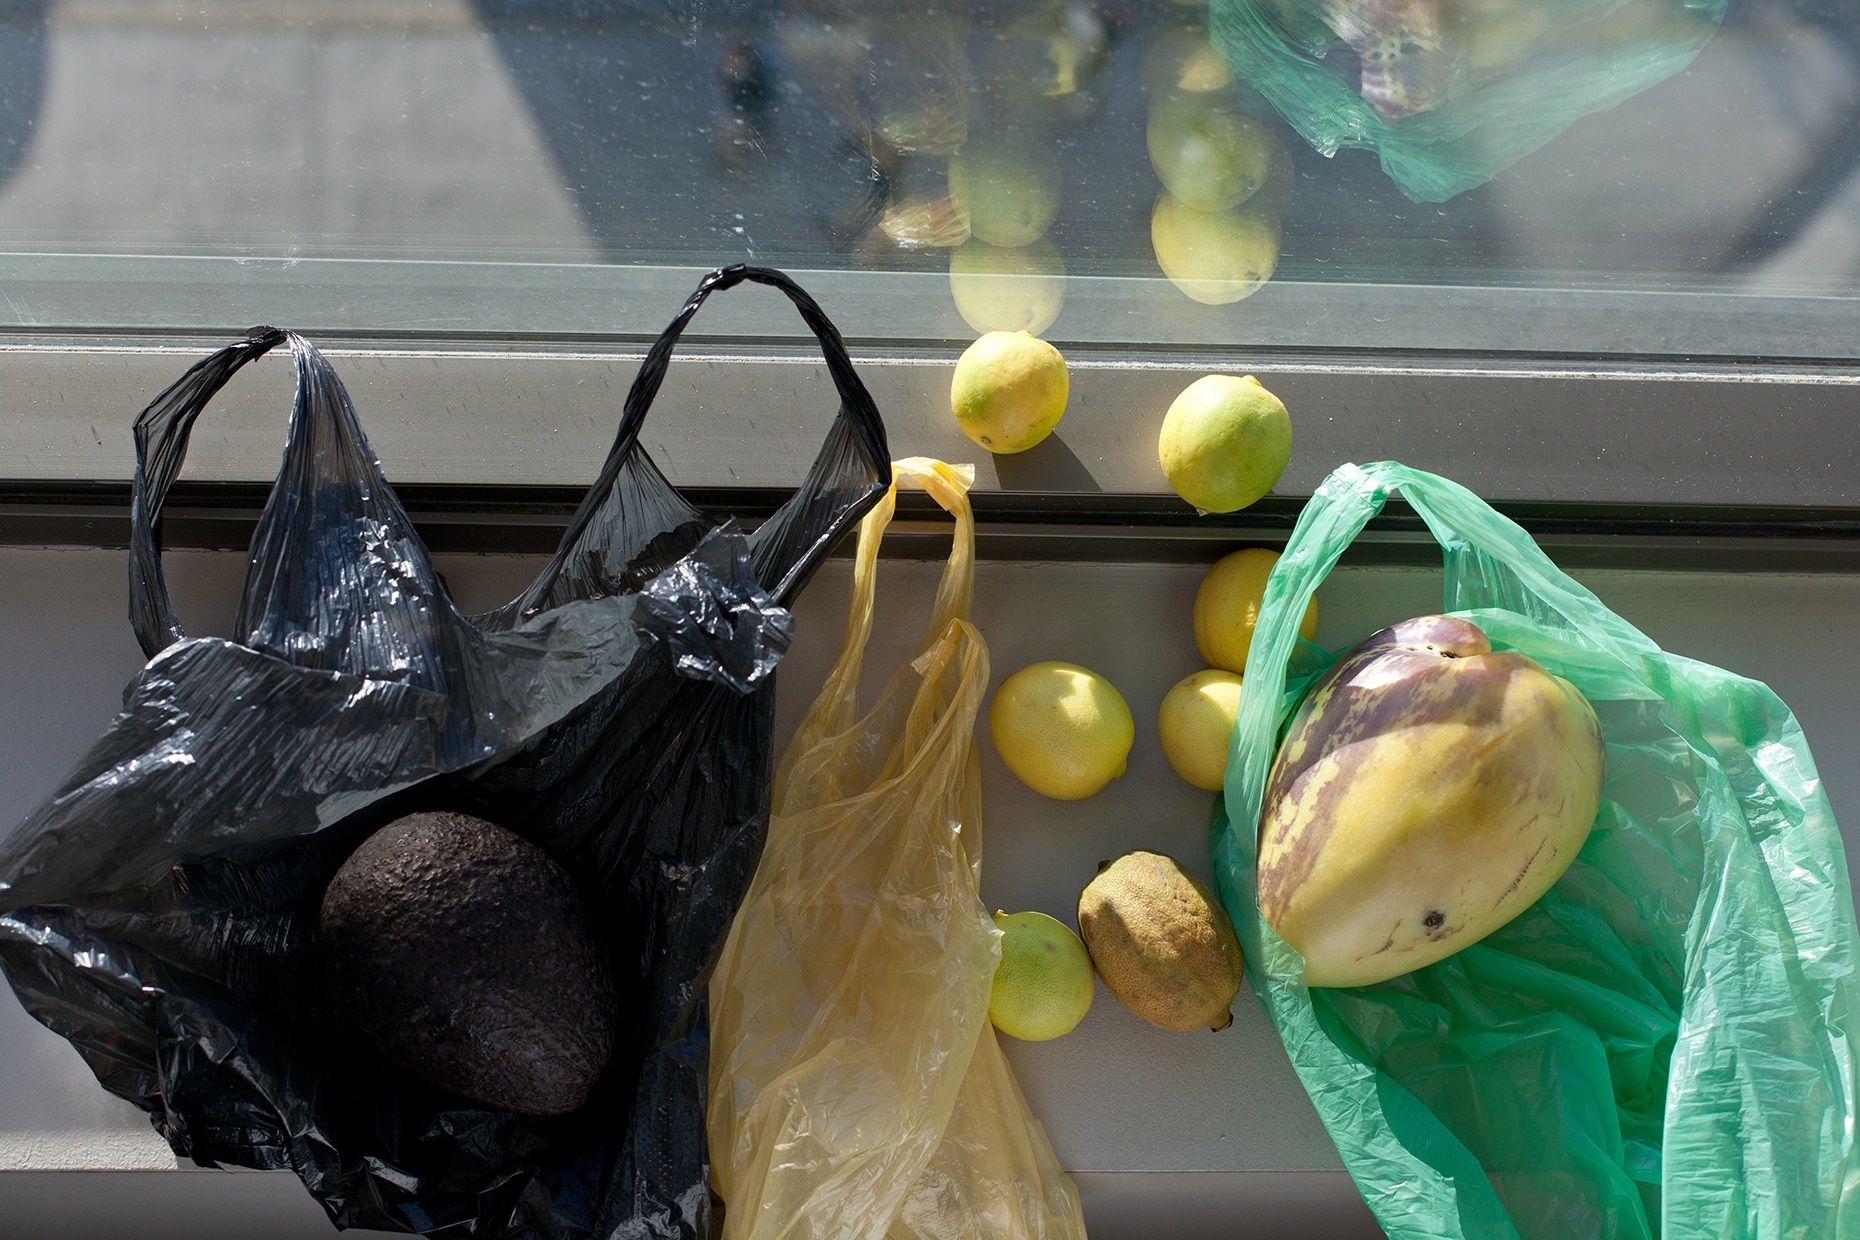 What is Wolfgang Tillmans' Still Life series all about?